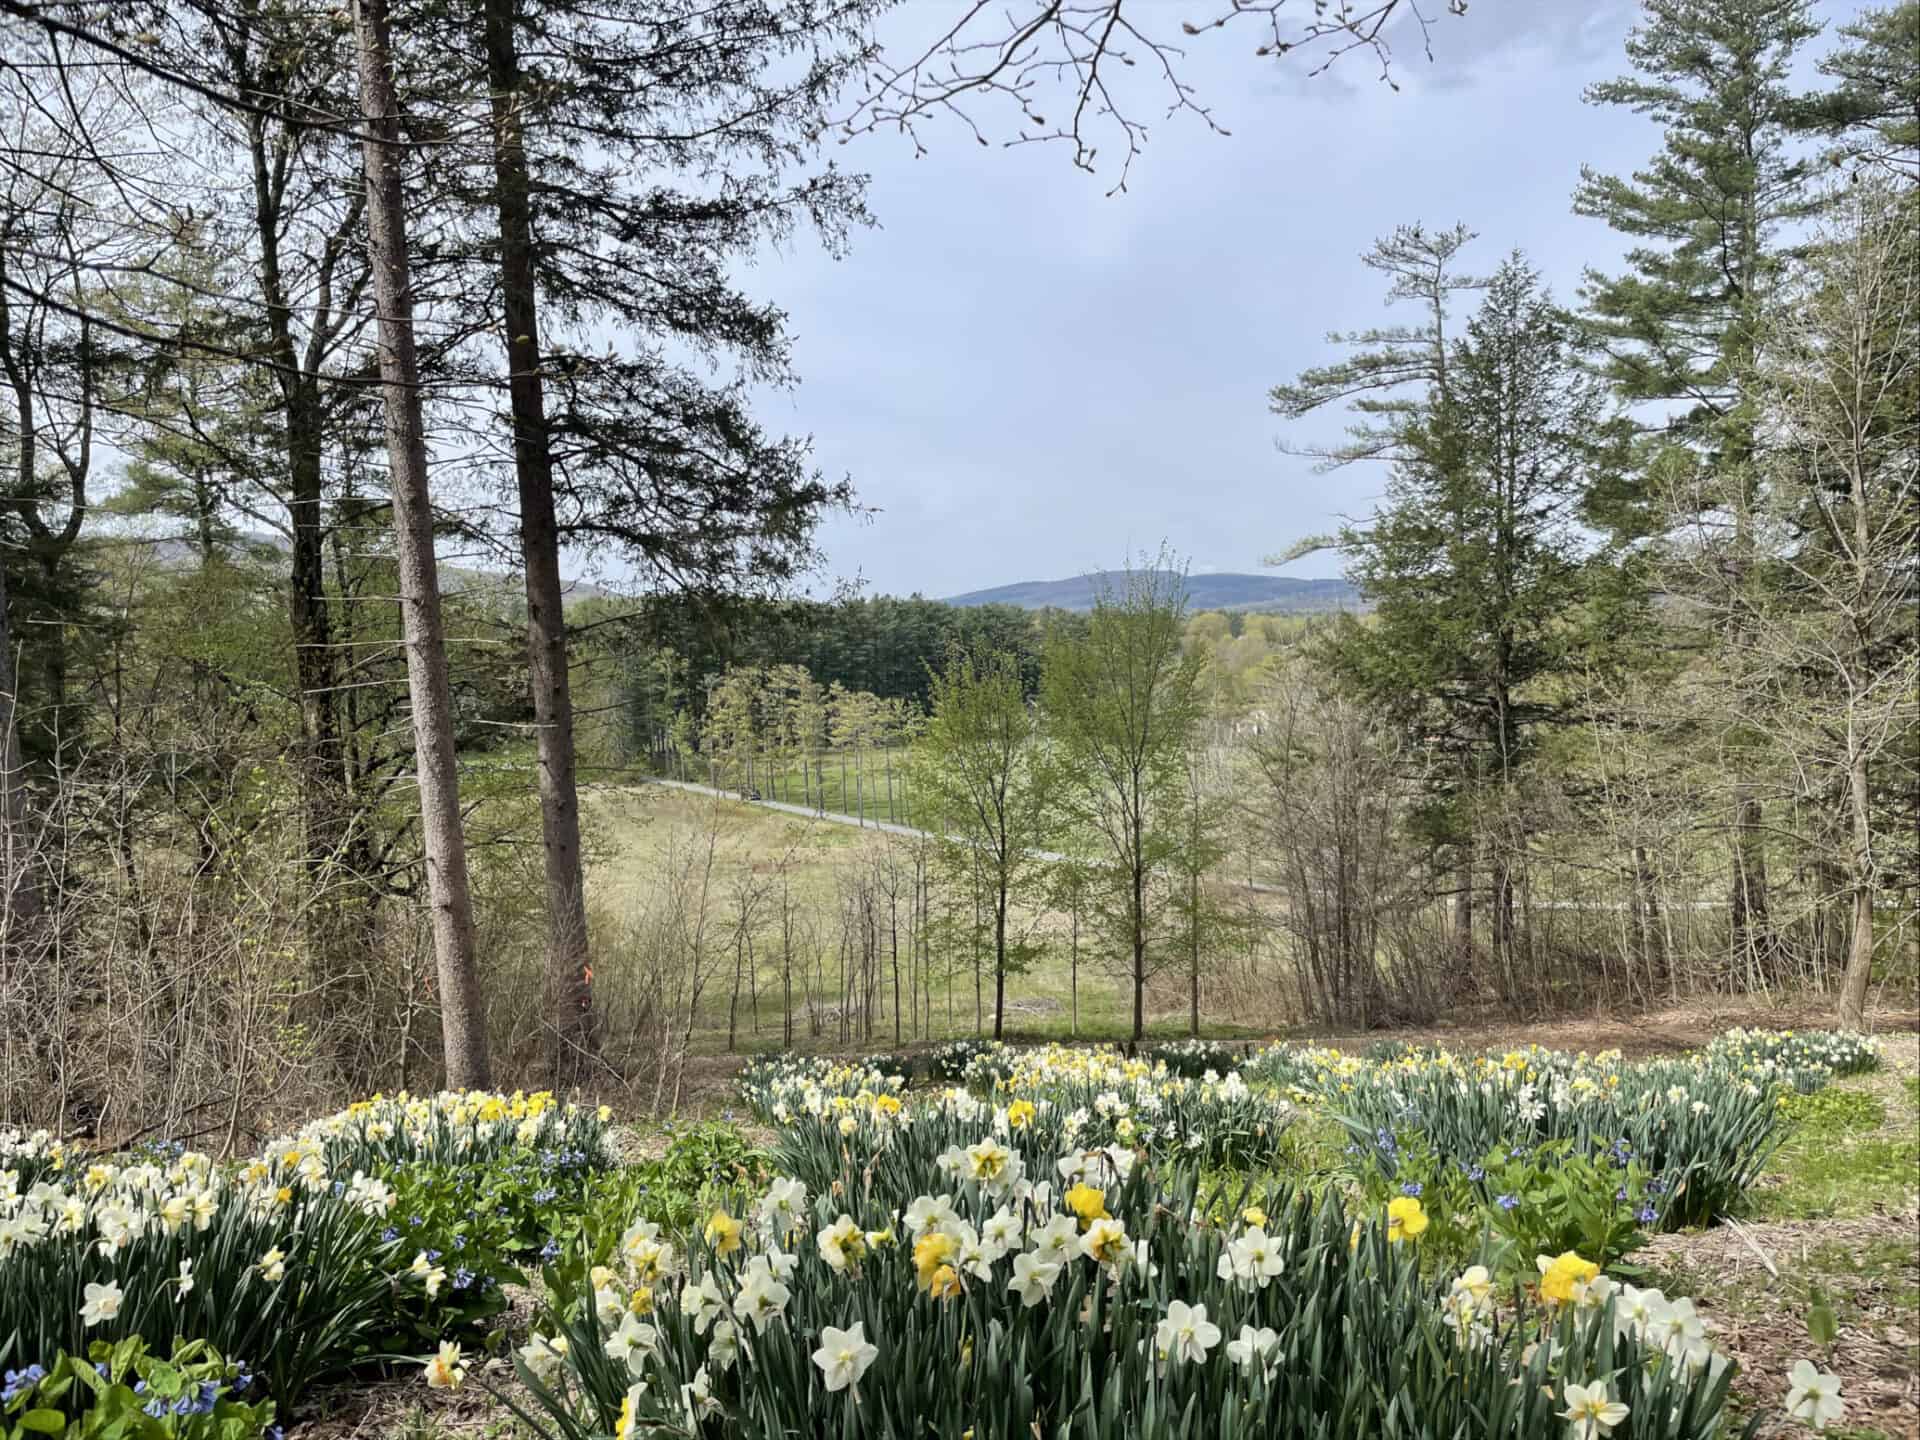 Daffodils bloom in the foreground with a wide view over the valley at the annual Daffodil and Tulip Festival at Naumkeag in Stockbridge.